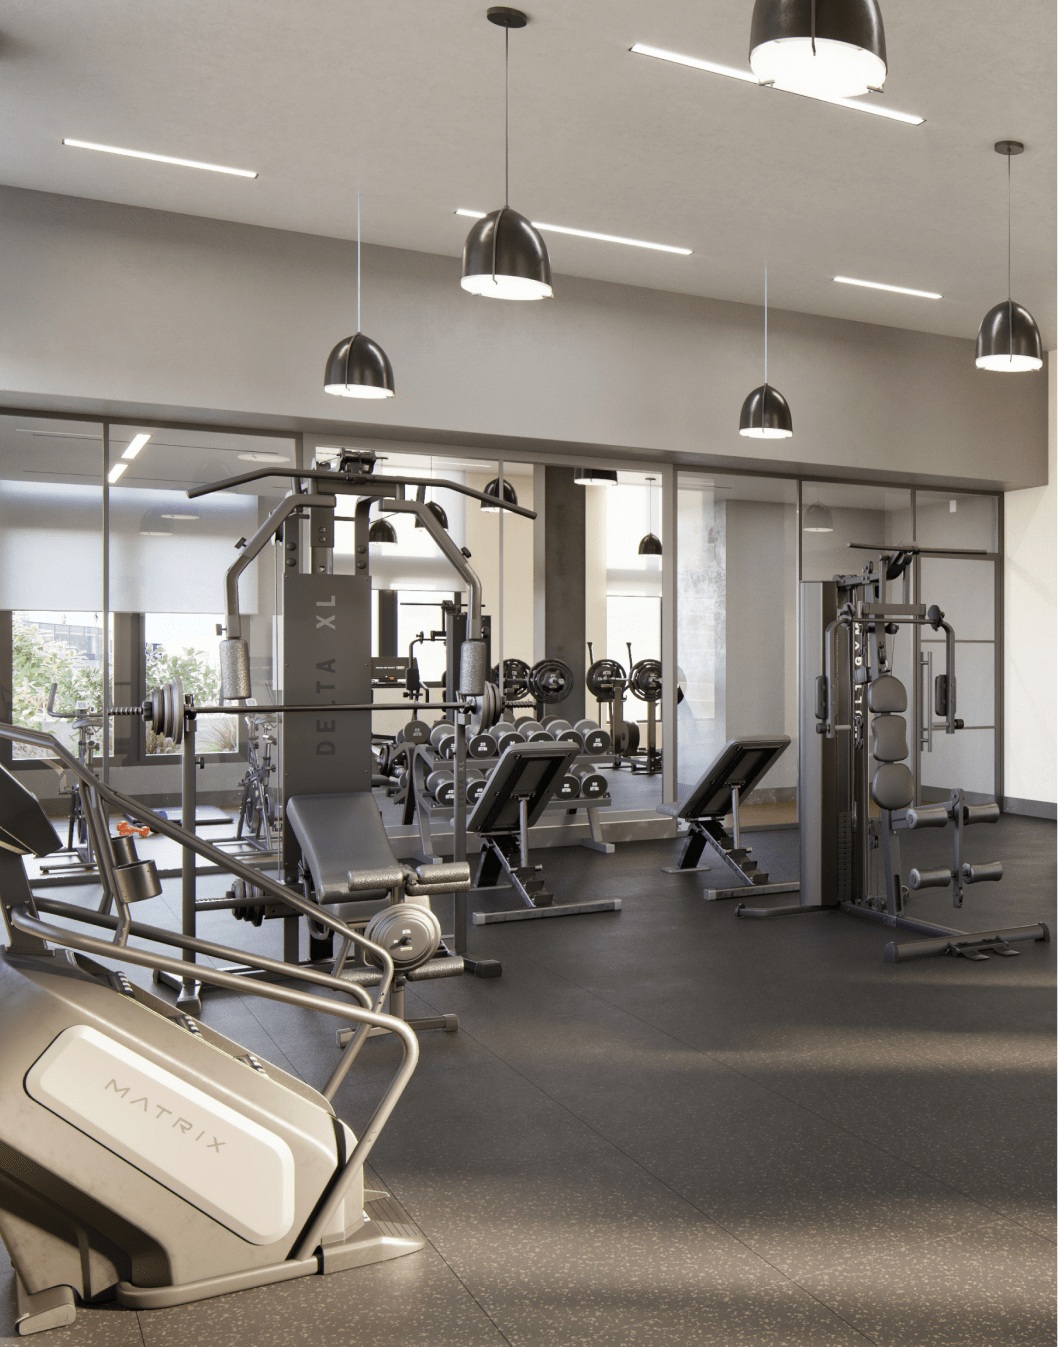 A gym room with exercise equipment & mirrors. One of the top-notch amenities at Elle's DC apartments.